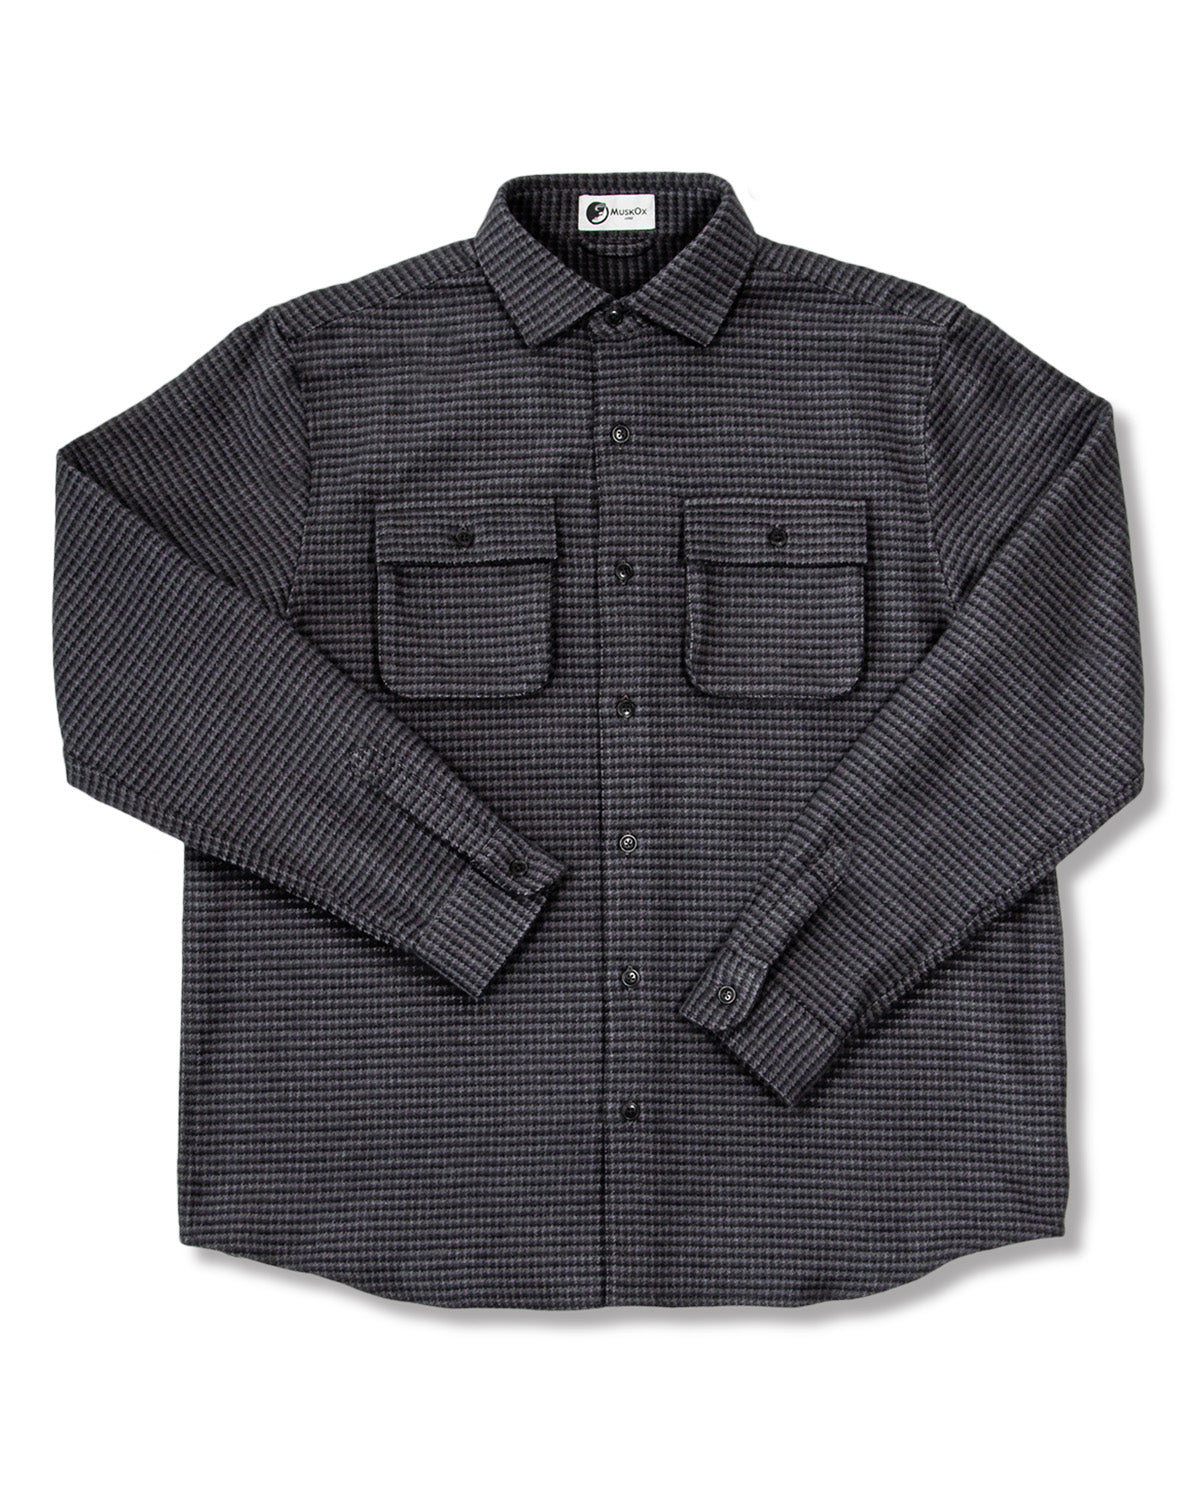 Relaxed Flannel, Charcoal Relaxed Fitting Heavyweight Flannel for Men ...